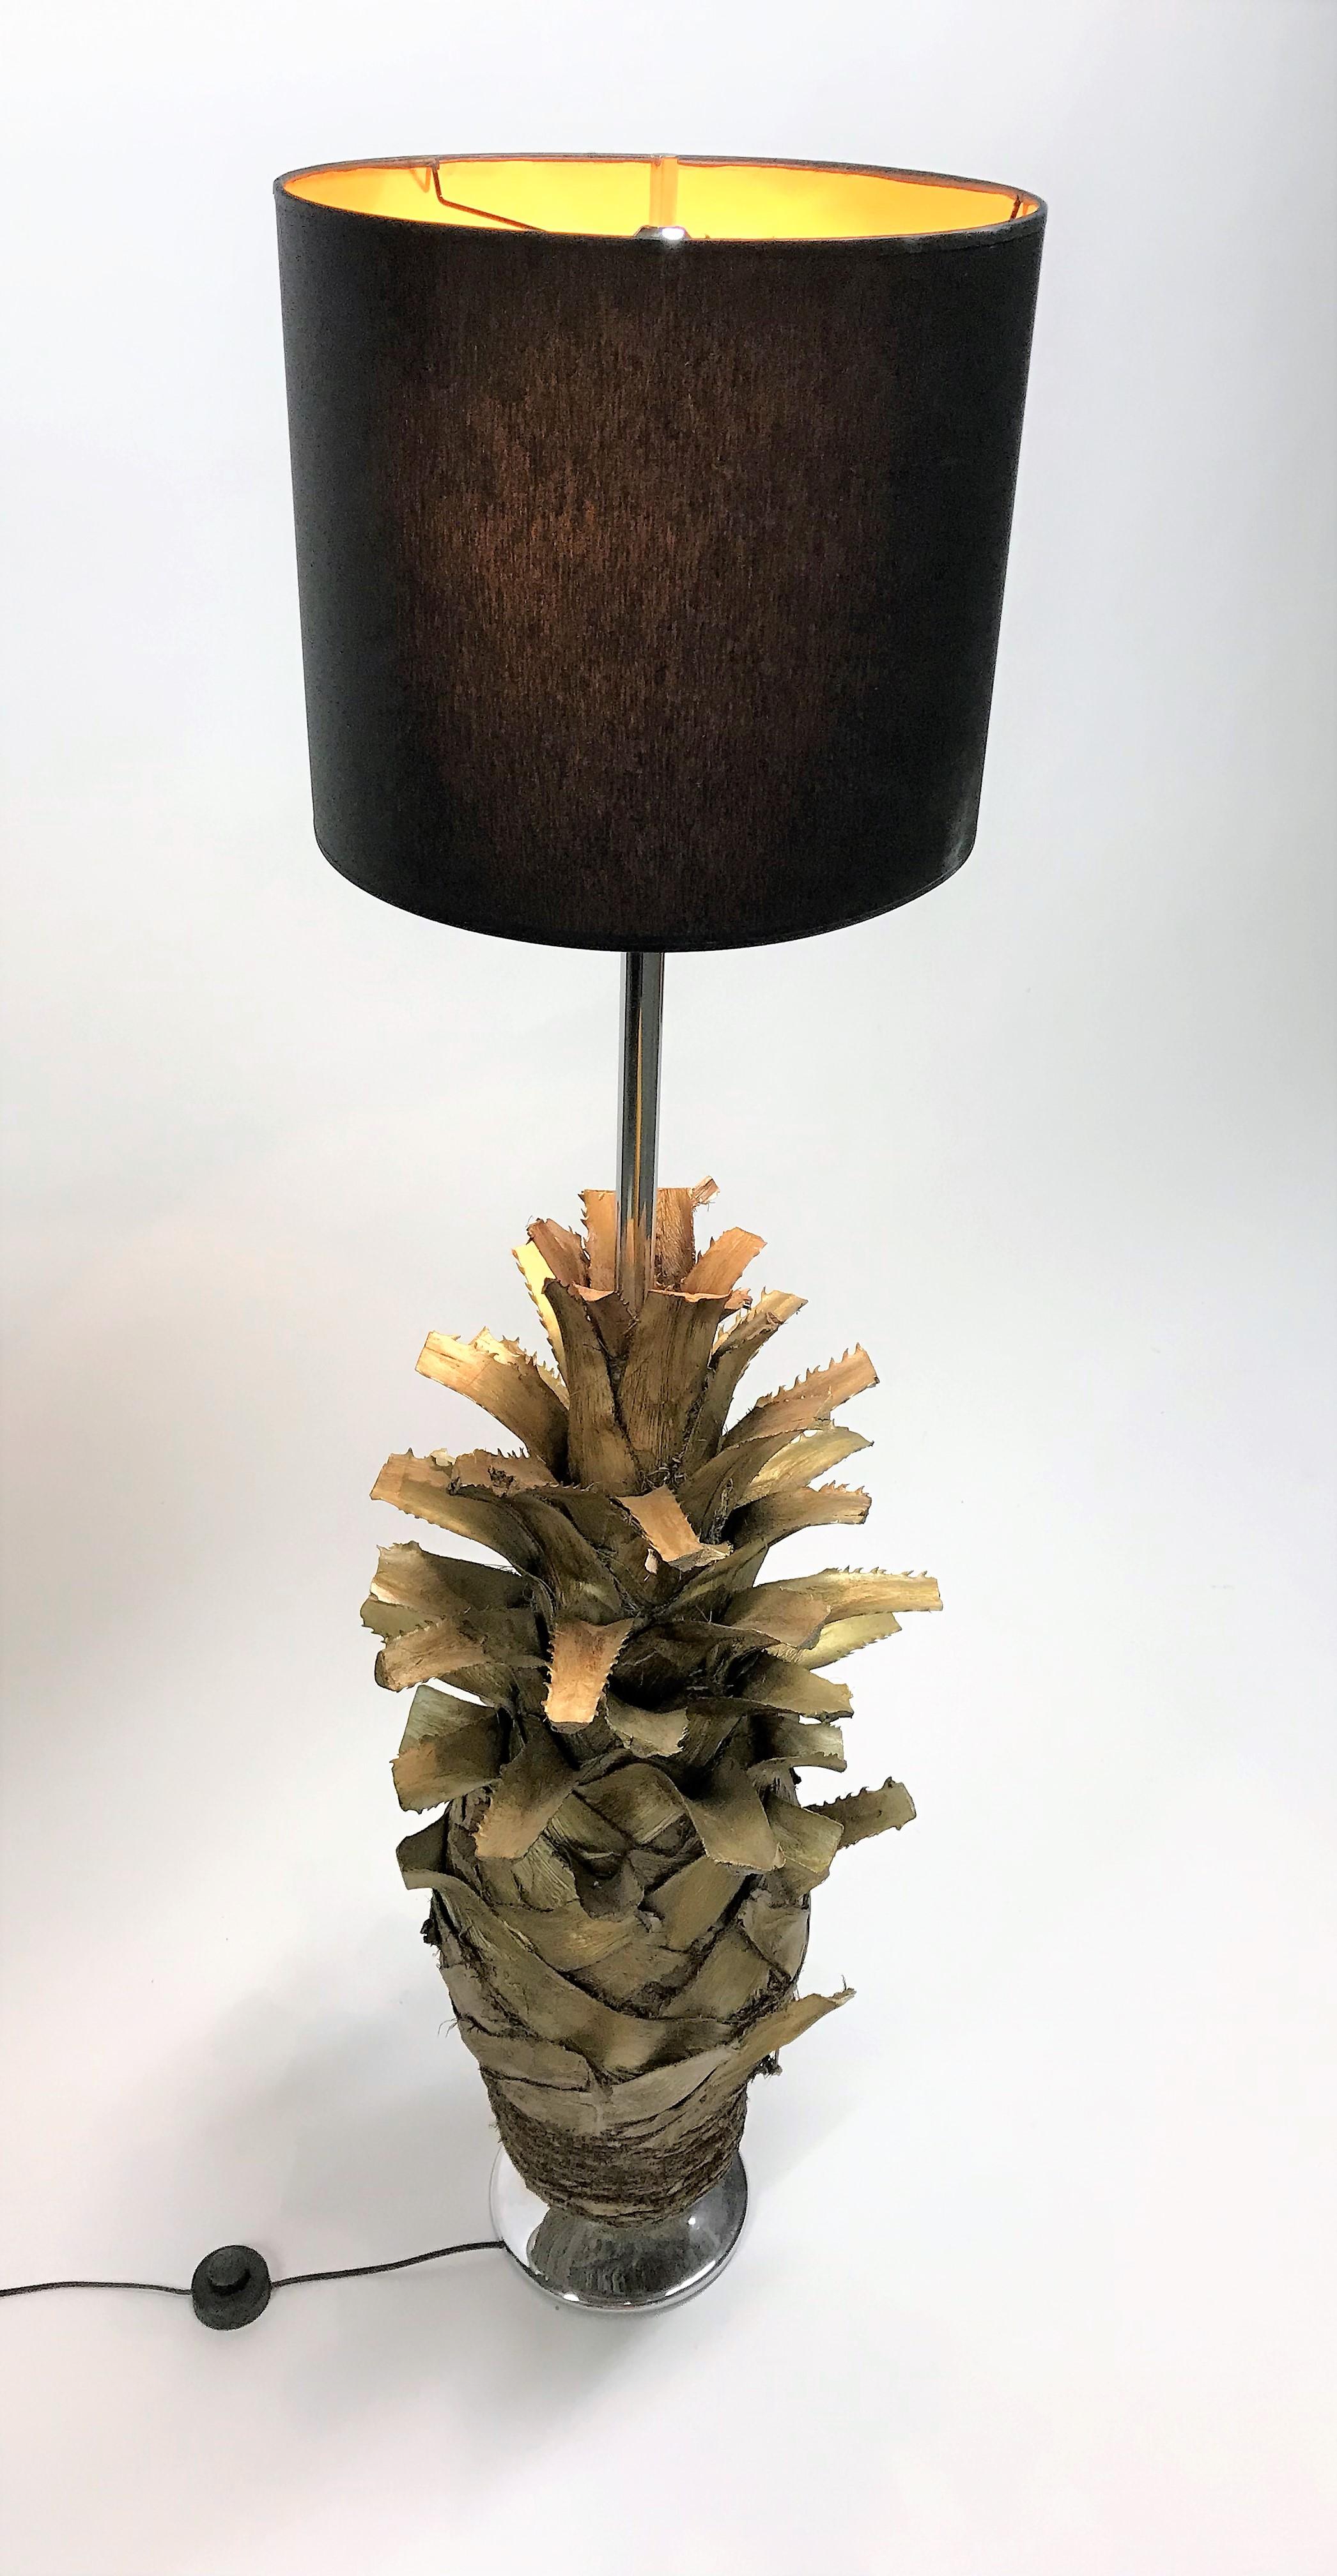 Unique vintage golden palm tree floor lamp.

Unlike many other palm tree floor lamps, this one isn't made out of brass or gilt metal but consists of a genuine gilded palm tree trunk with a chrome rod providing two bakelite lightpoints. It sits on